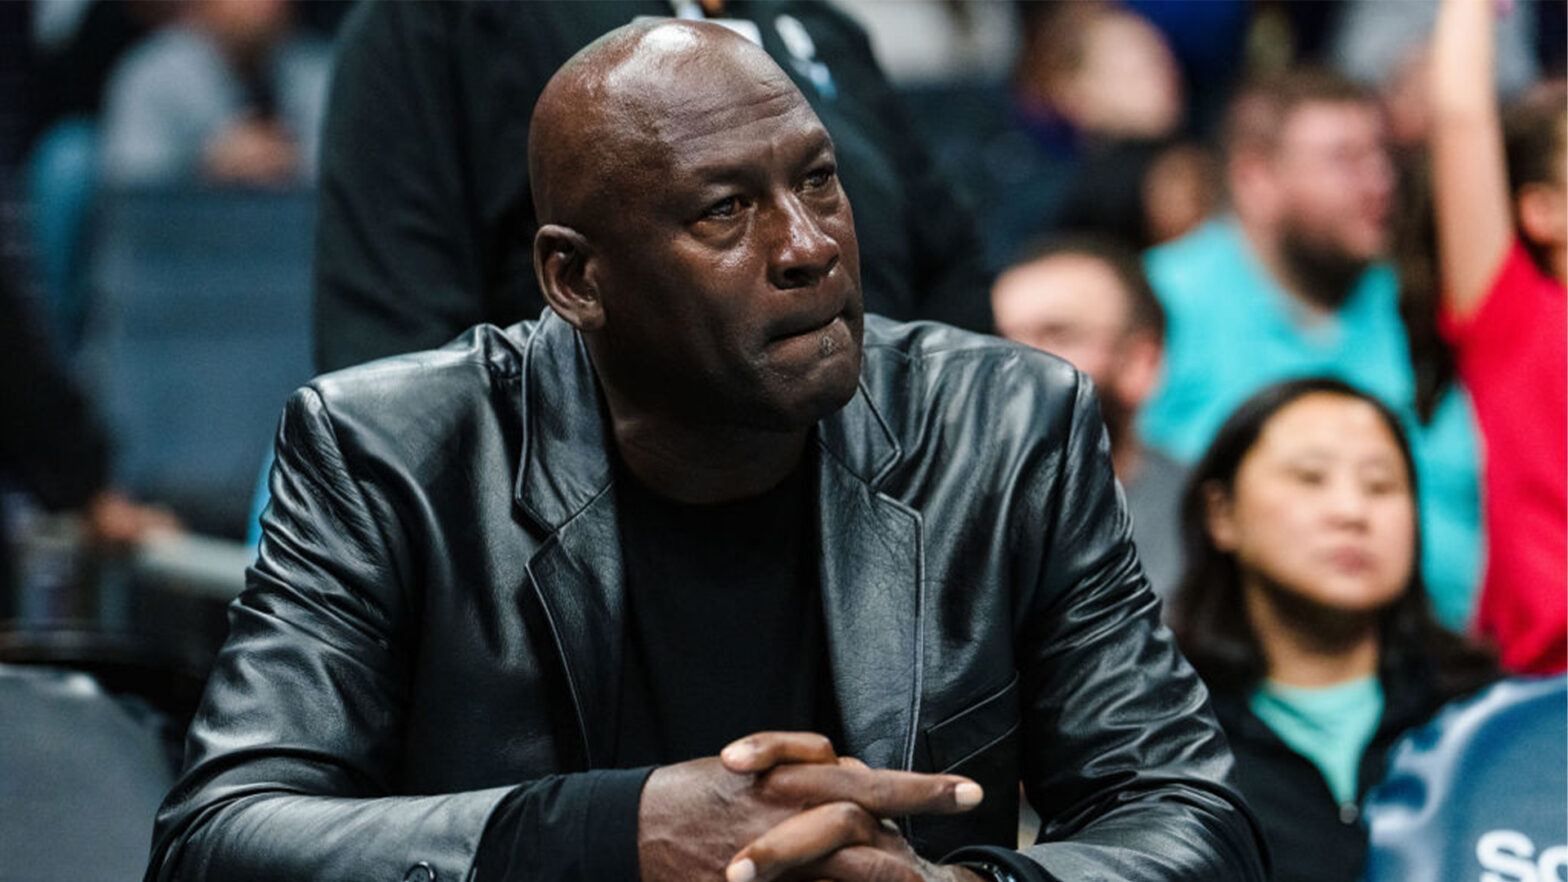 Michael Jordan Bought His Share Of The Charlotte Hornets For $275M In 2010 — He'll Make 11 Times His Investment If Approved